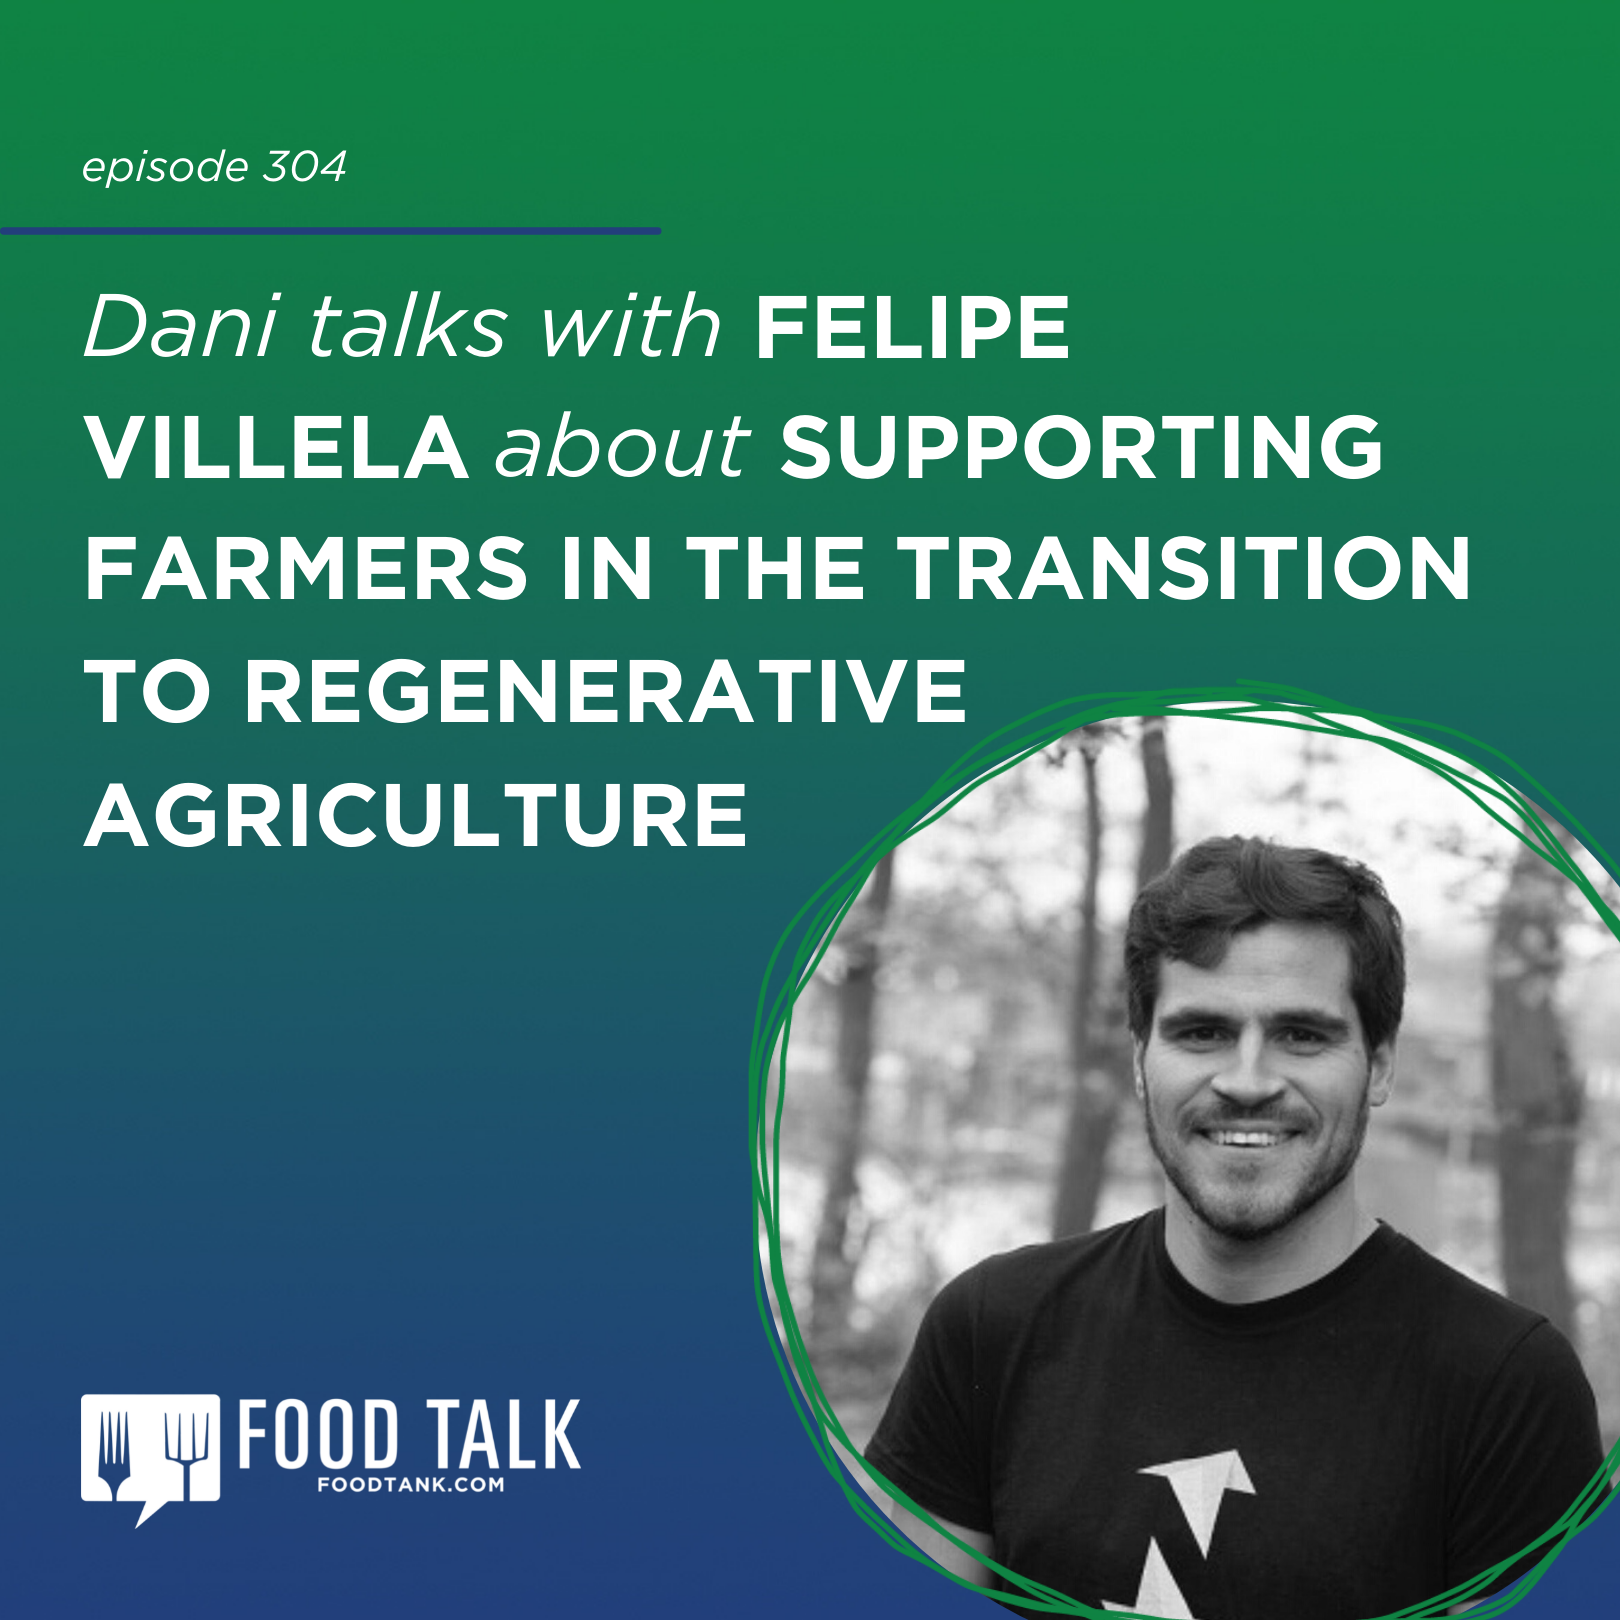 https://podcasts.apple.com/us/podcast/304-felipe-villela-on-supporting-farmers-in-the/id1434128568?i=1000551358116